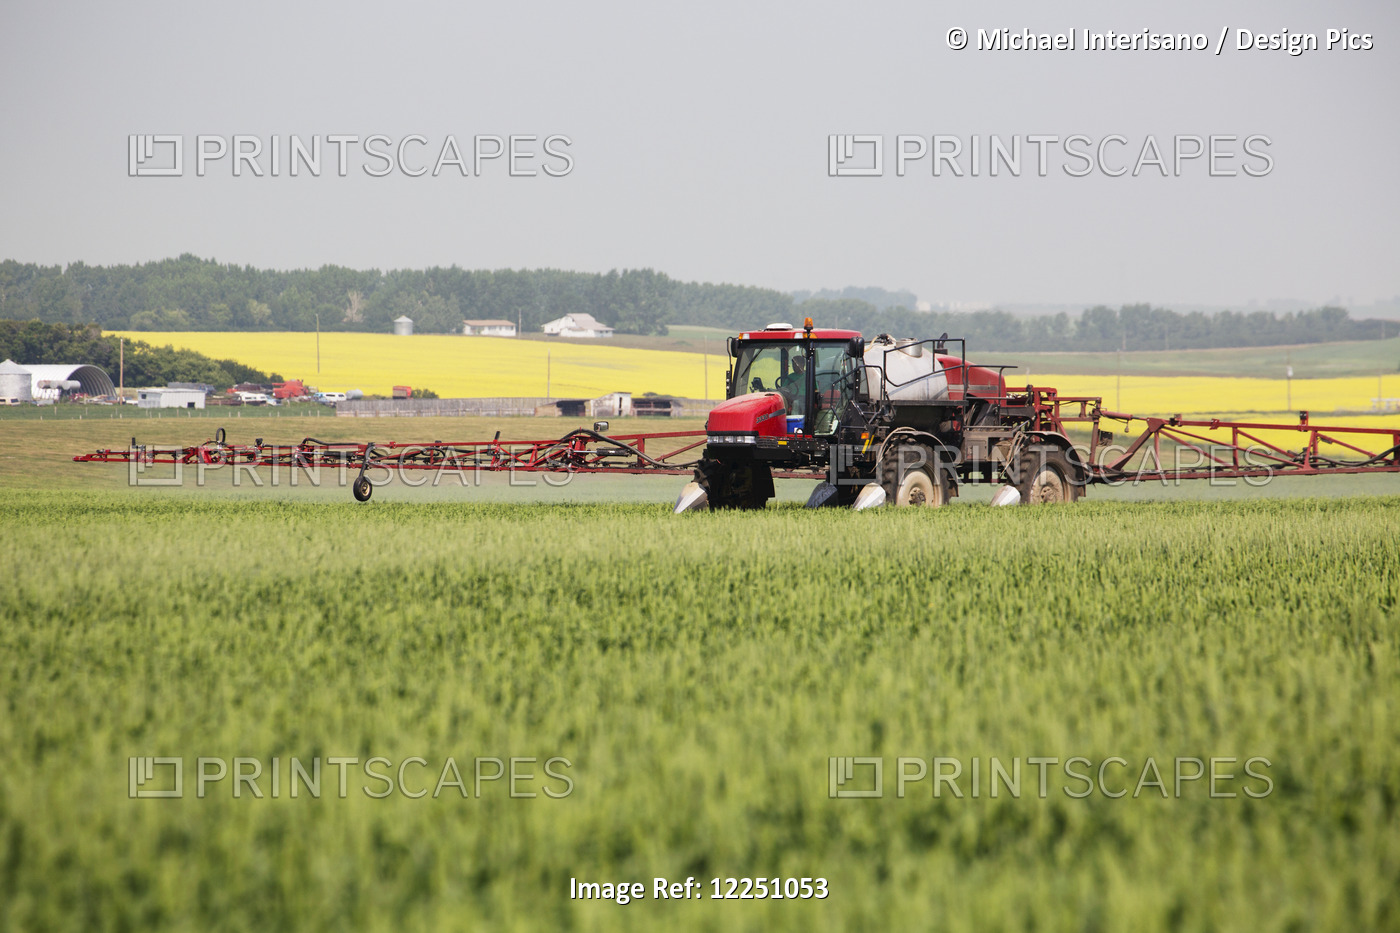 Crop Sprayer In The Field Spraying An Early Growth Wheat Crop With A Flowering ...